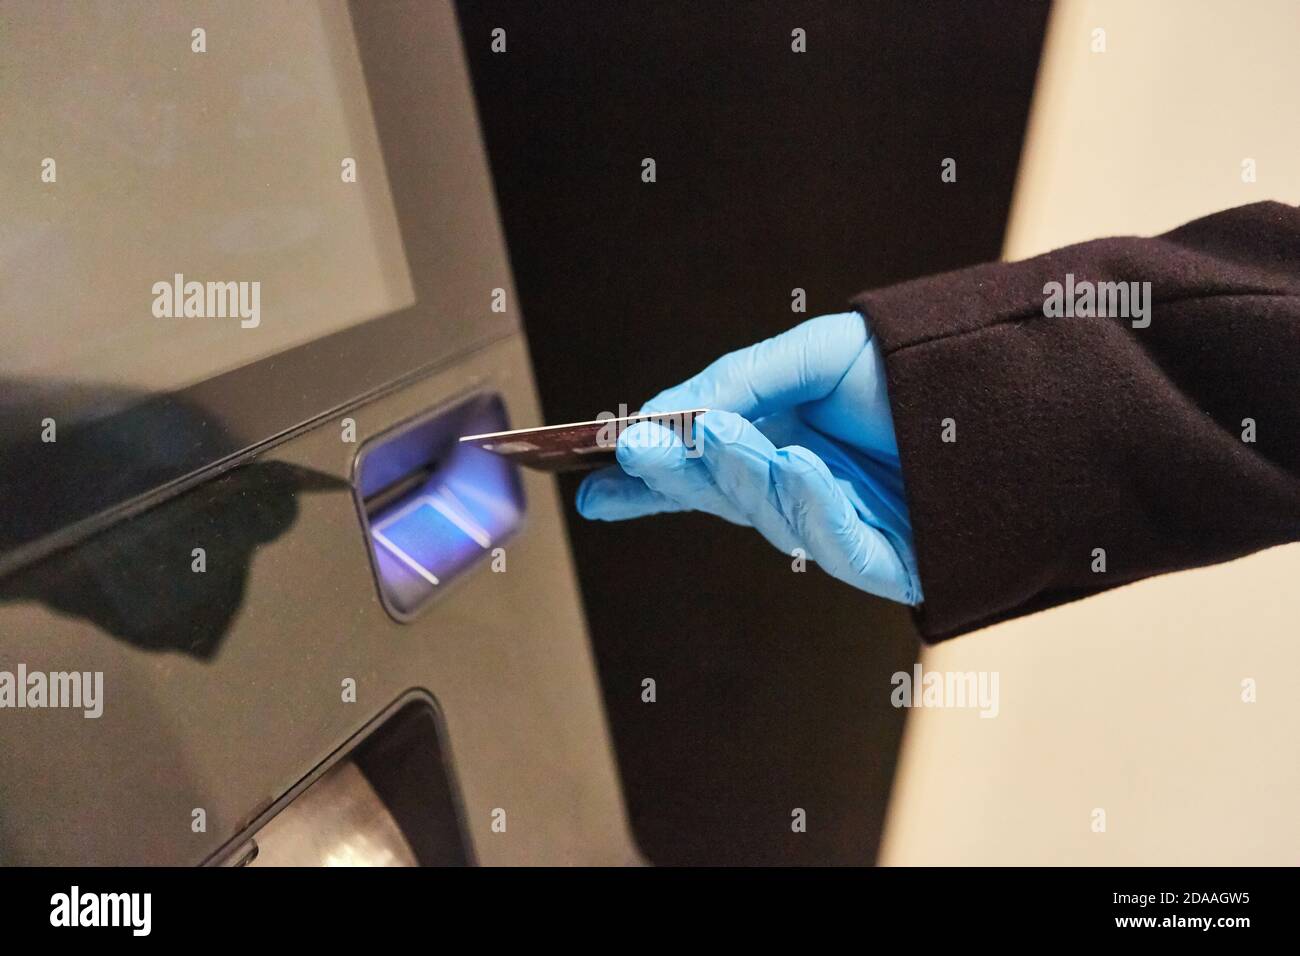 Hand in disposable gloves puts bank card in ATM during Covid-19 pandemic Stock Photo